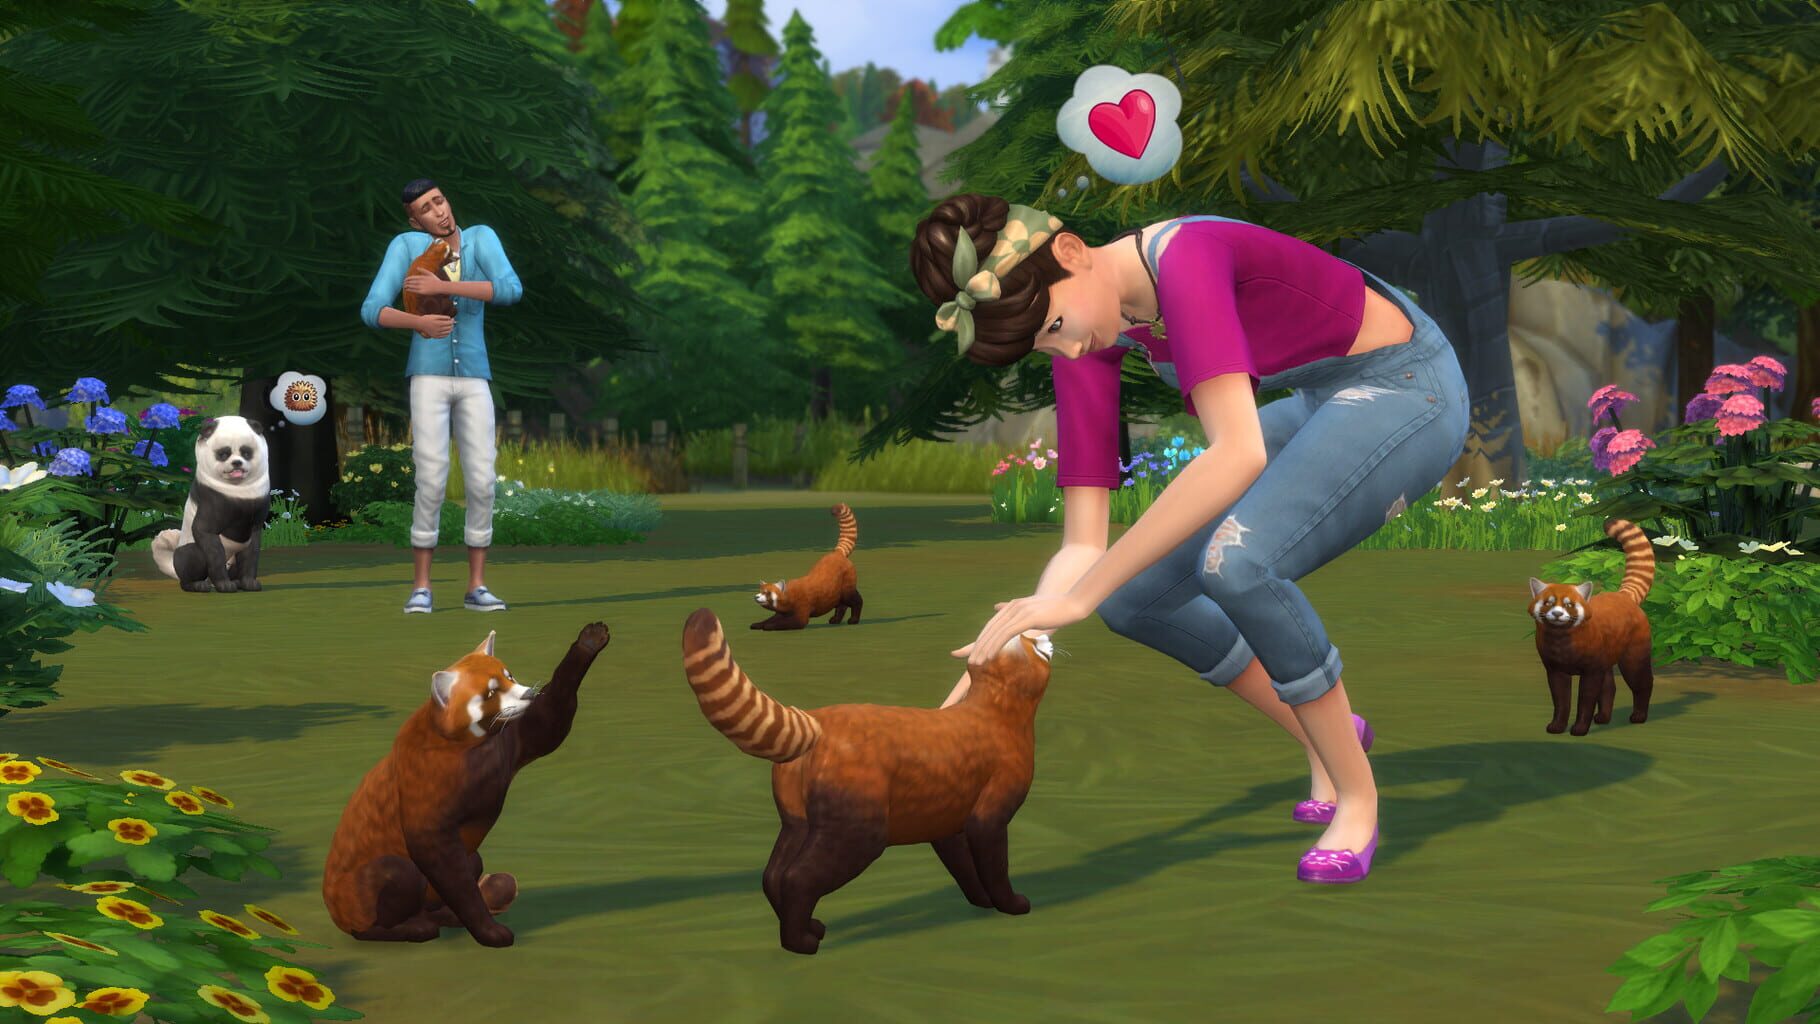 The Sims 4: Cats & Dogs Image